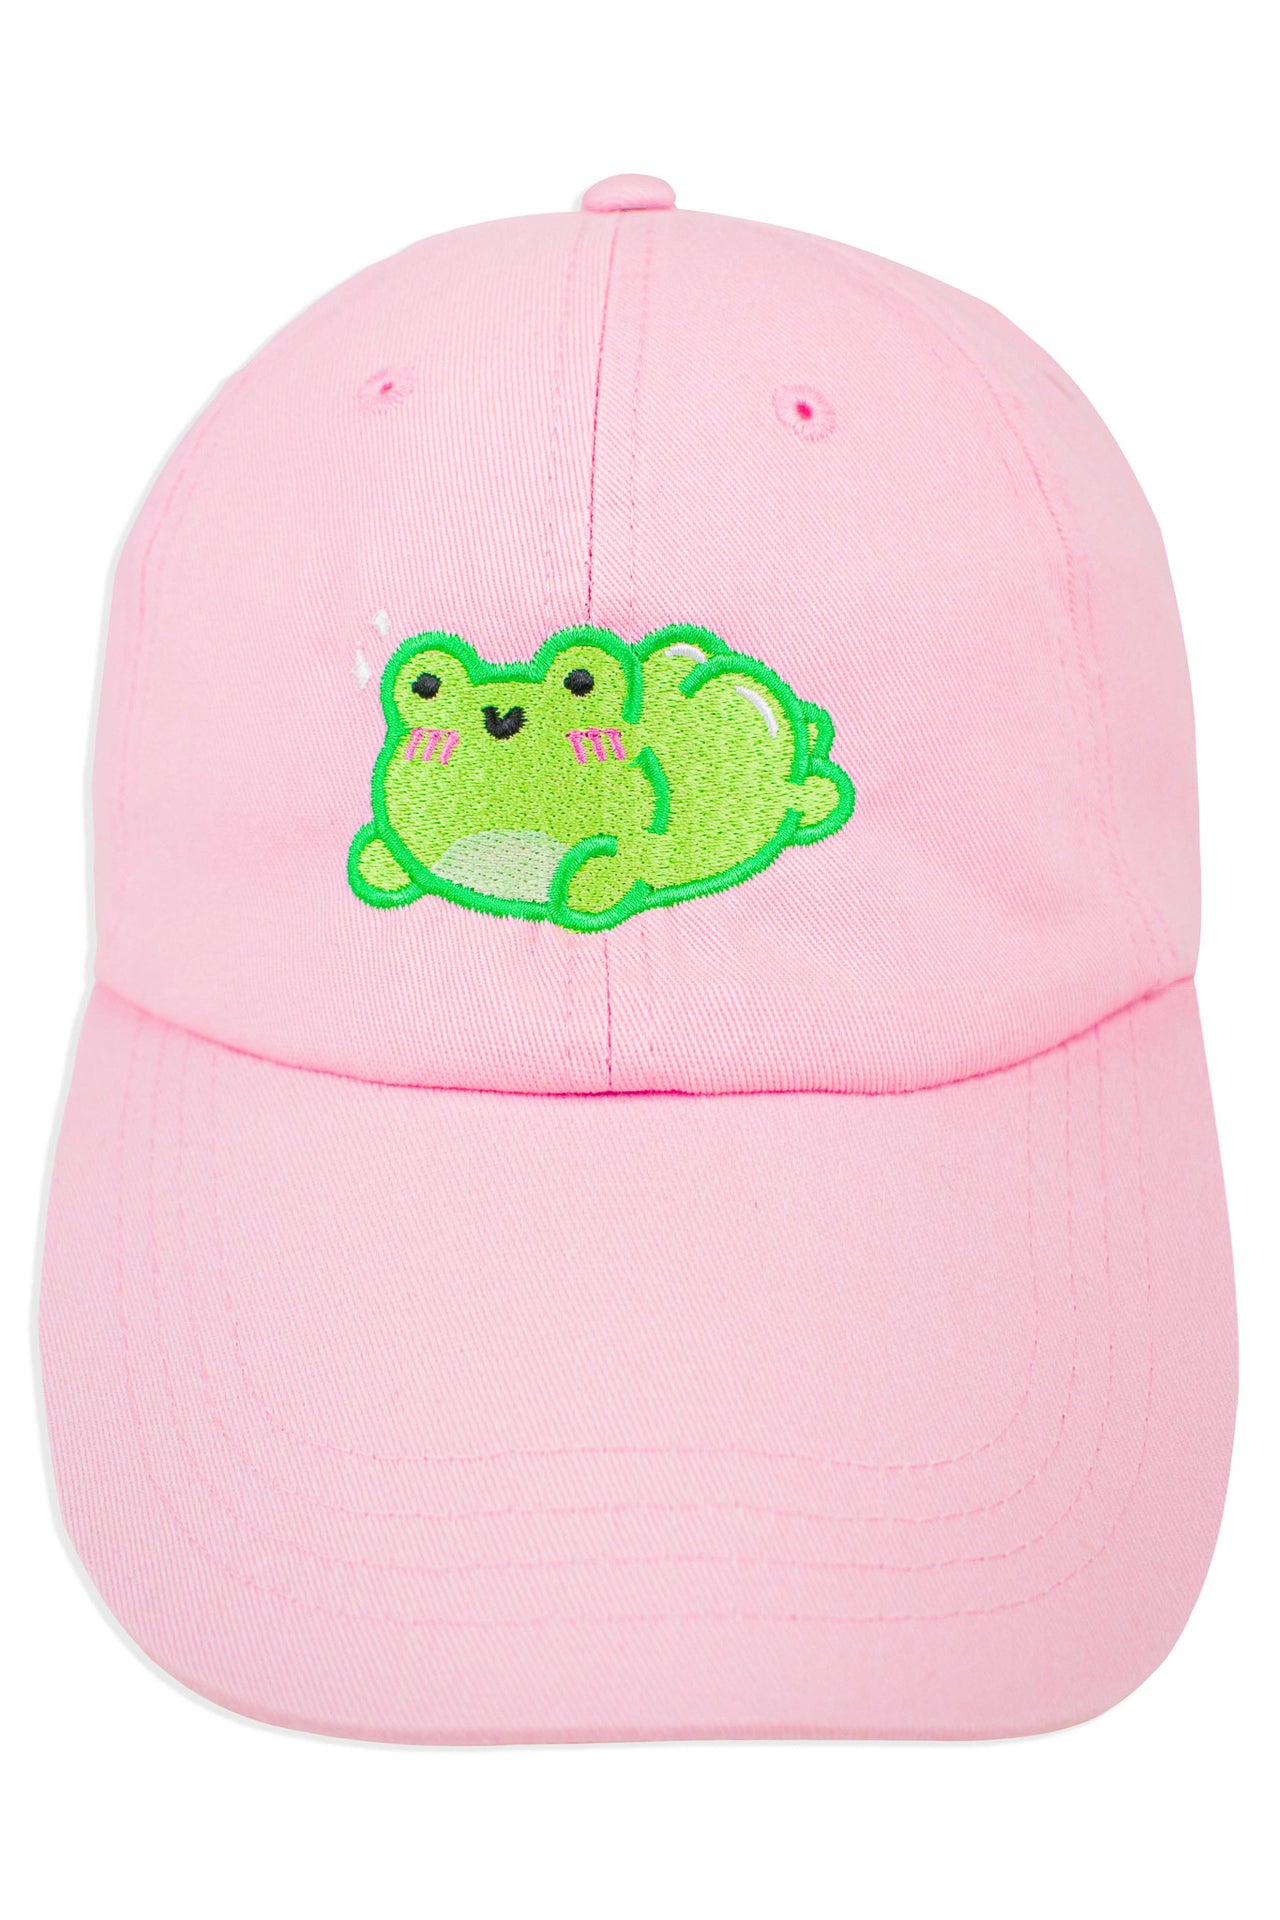 Thicc Albert The Frog Embroidered Cap - Momokakkoii